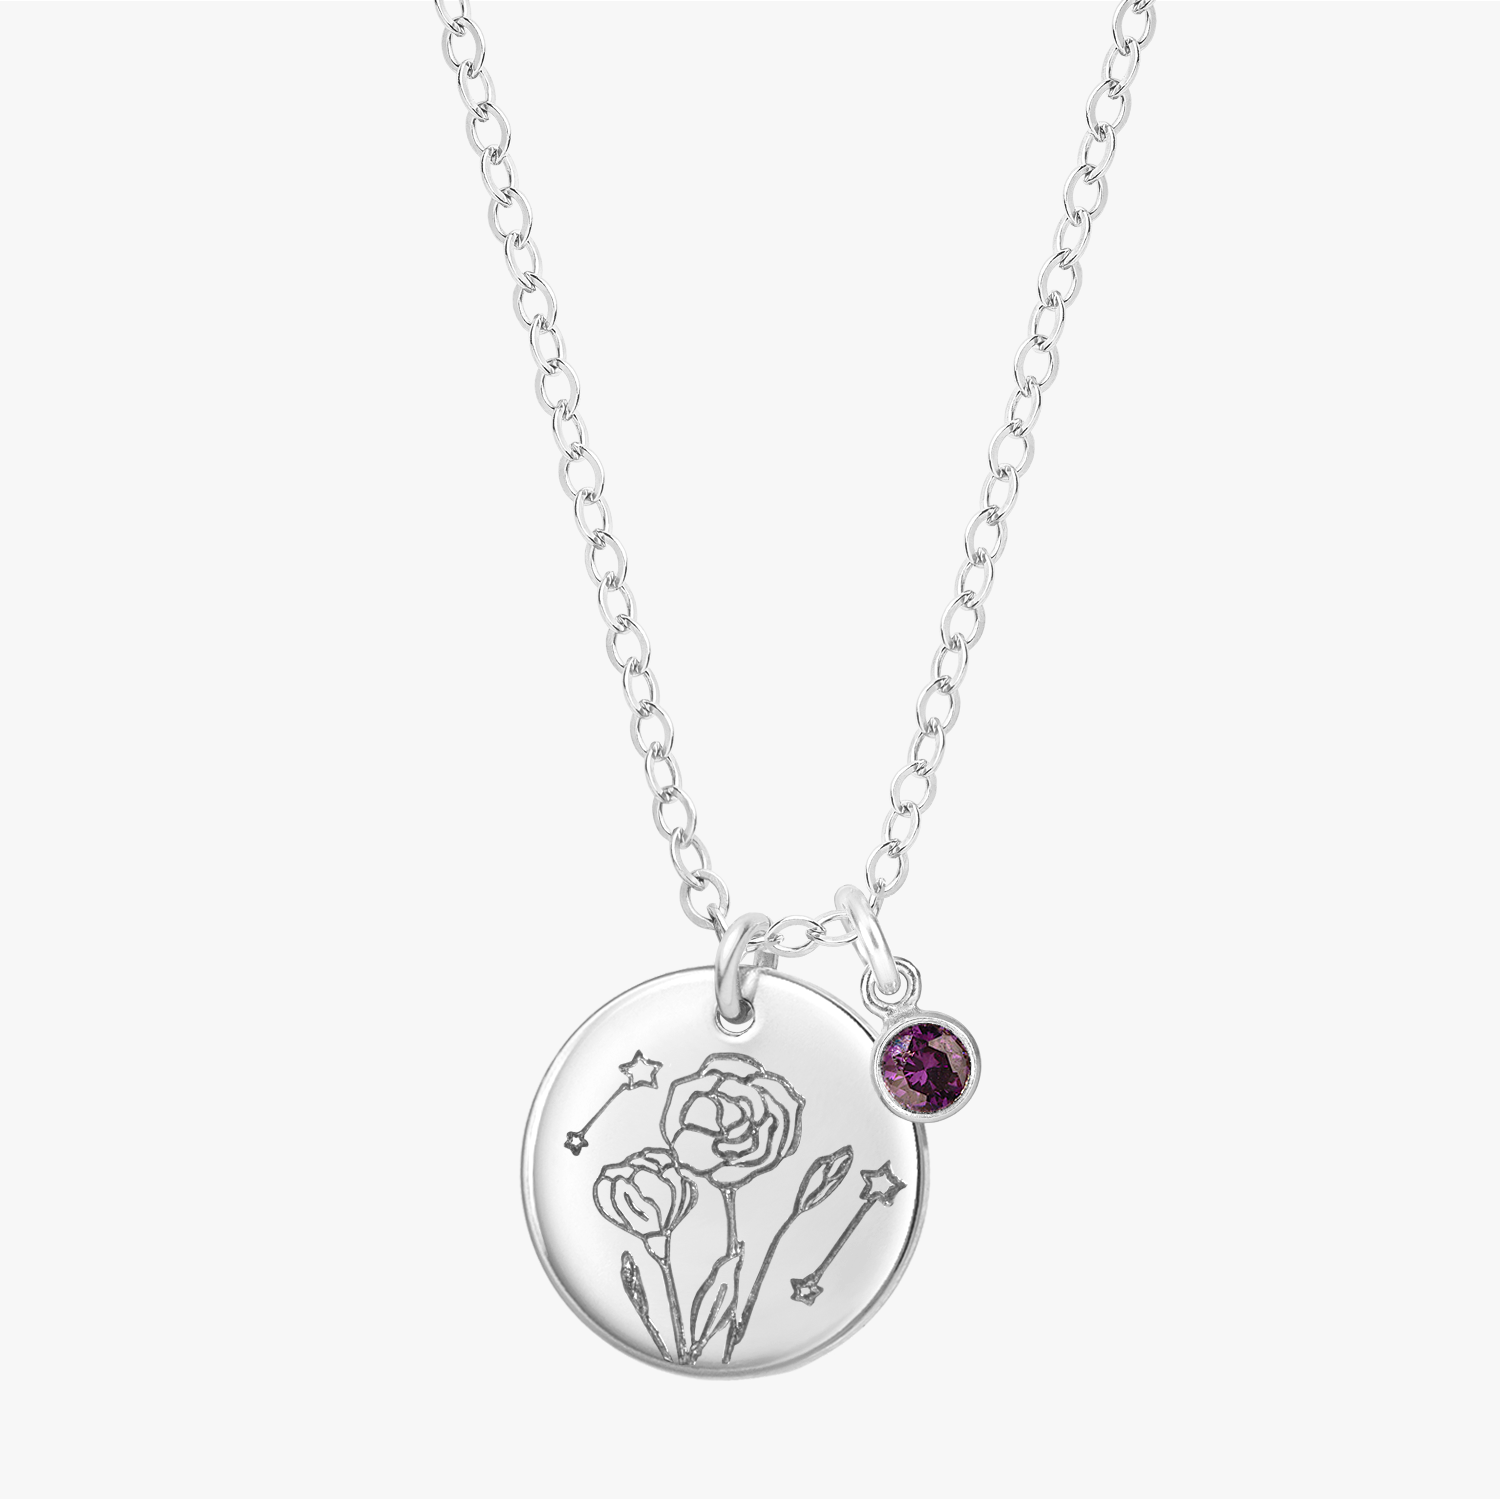 Personalized Stardust Bloom Necklace